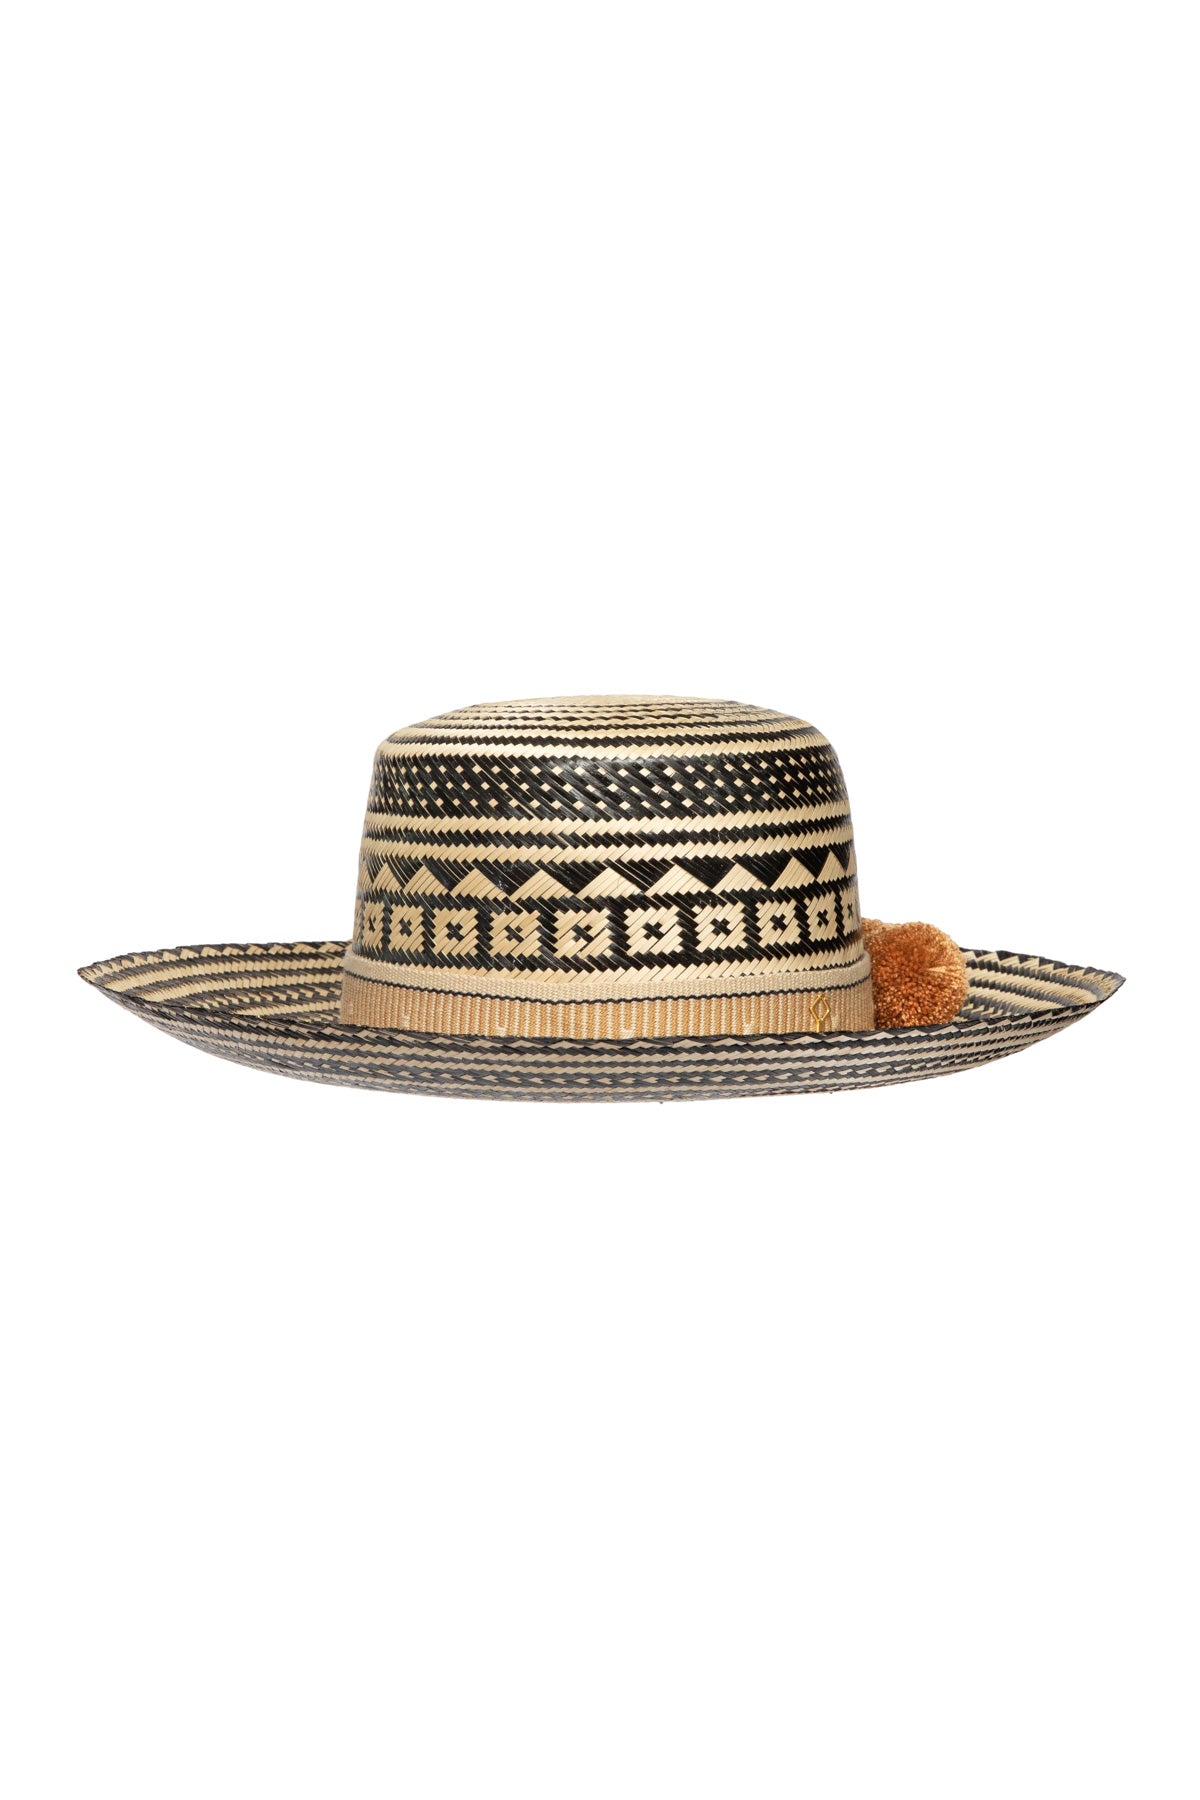 Straw Hat - Black with Brown PomPoms